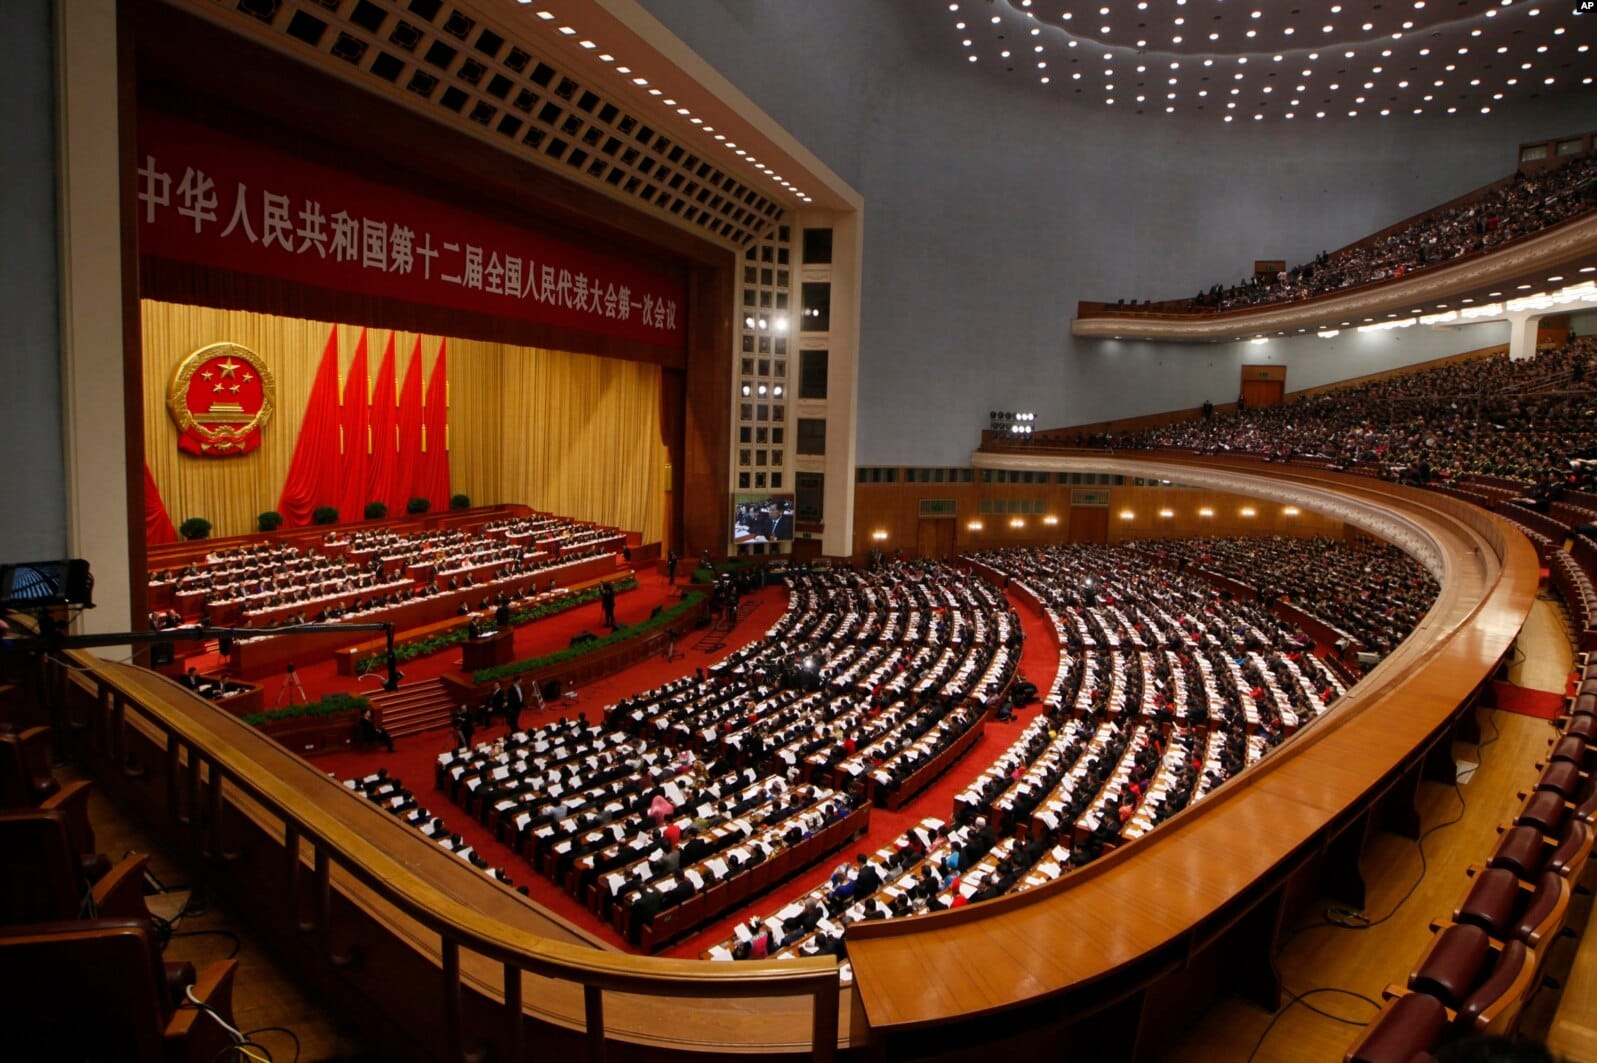 The 12th National People's Congress in the Great Hall of the People in Beijing in March of 2013.